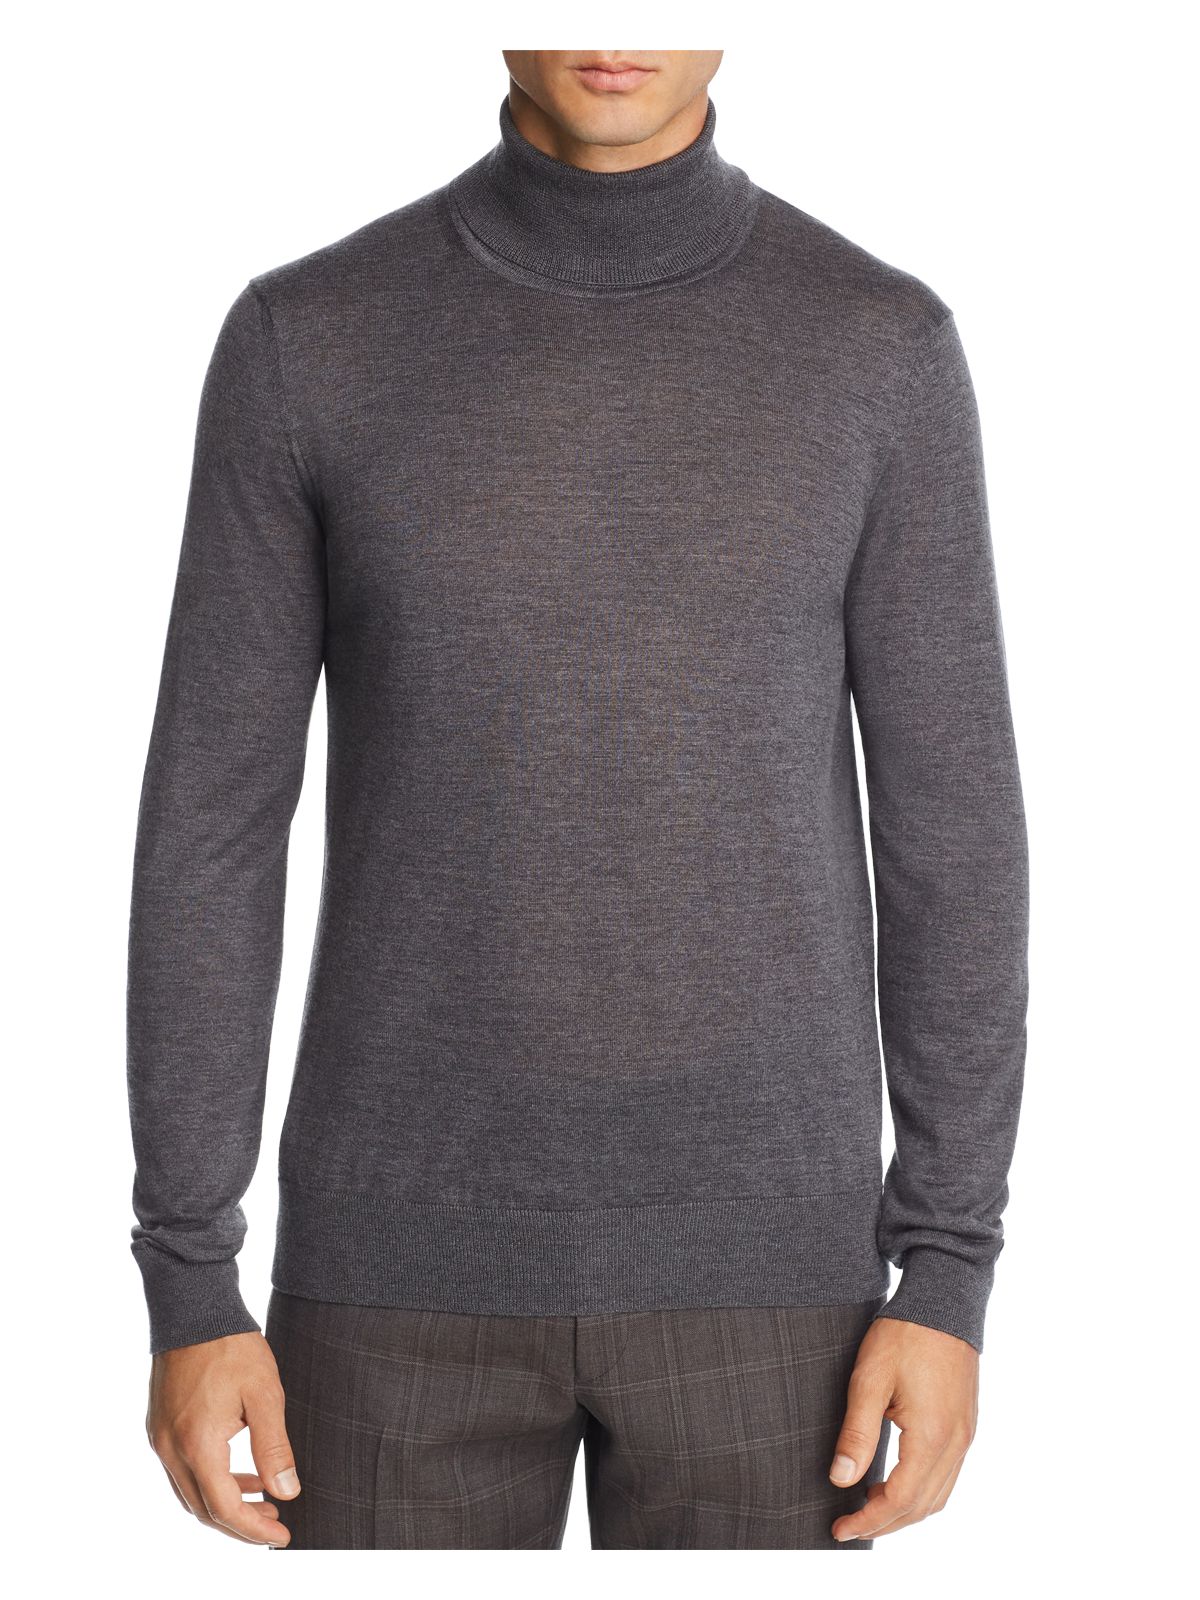 The Mens store Mens Gray Long Sleeve Turtle Neck Classic Fit Quarter-Zip Merino Blend Pullover Sweater XL